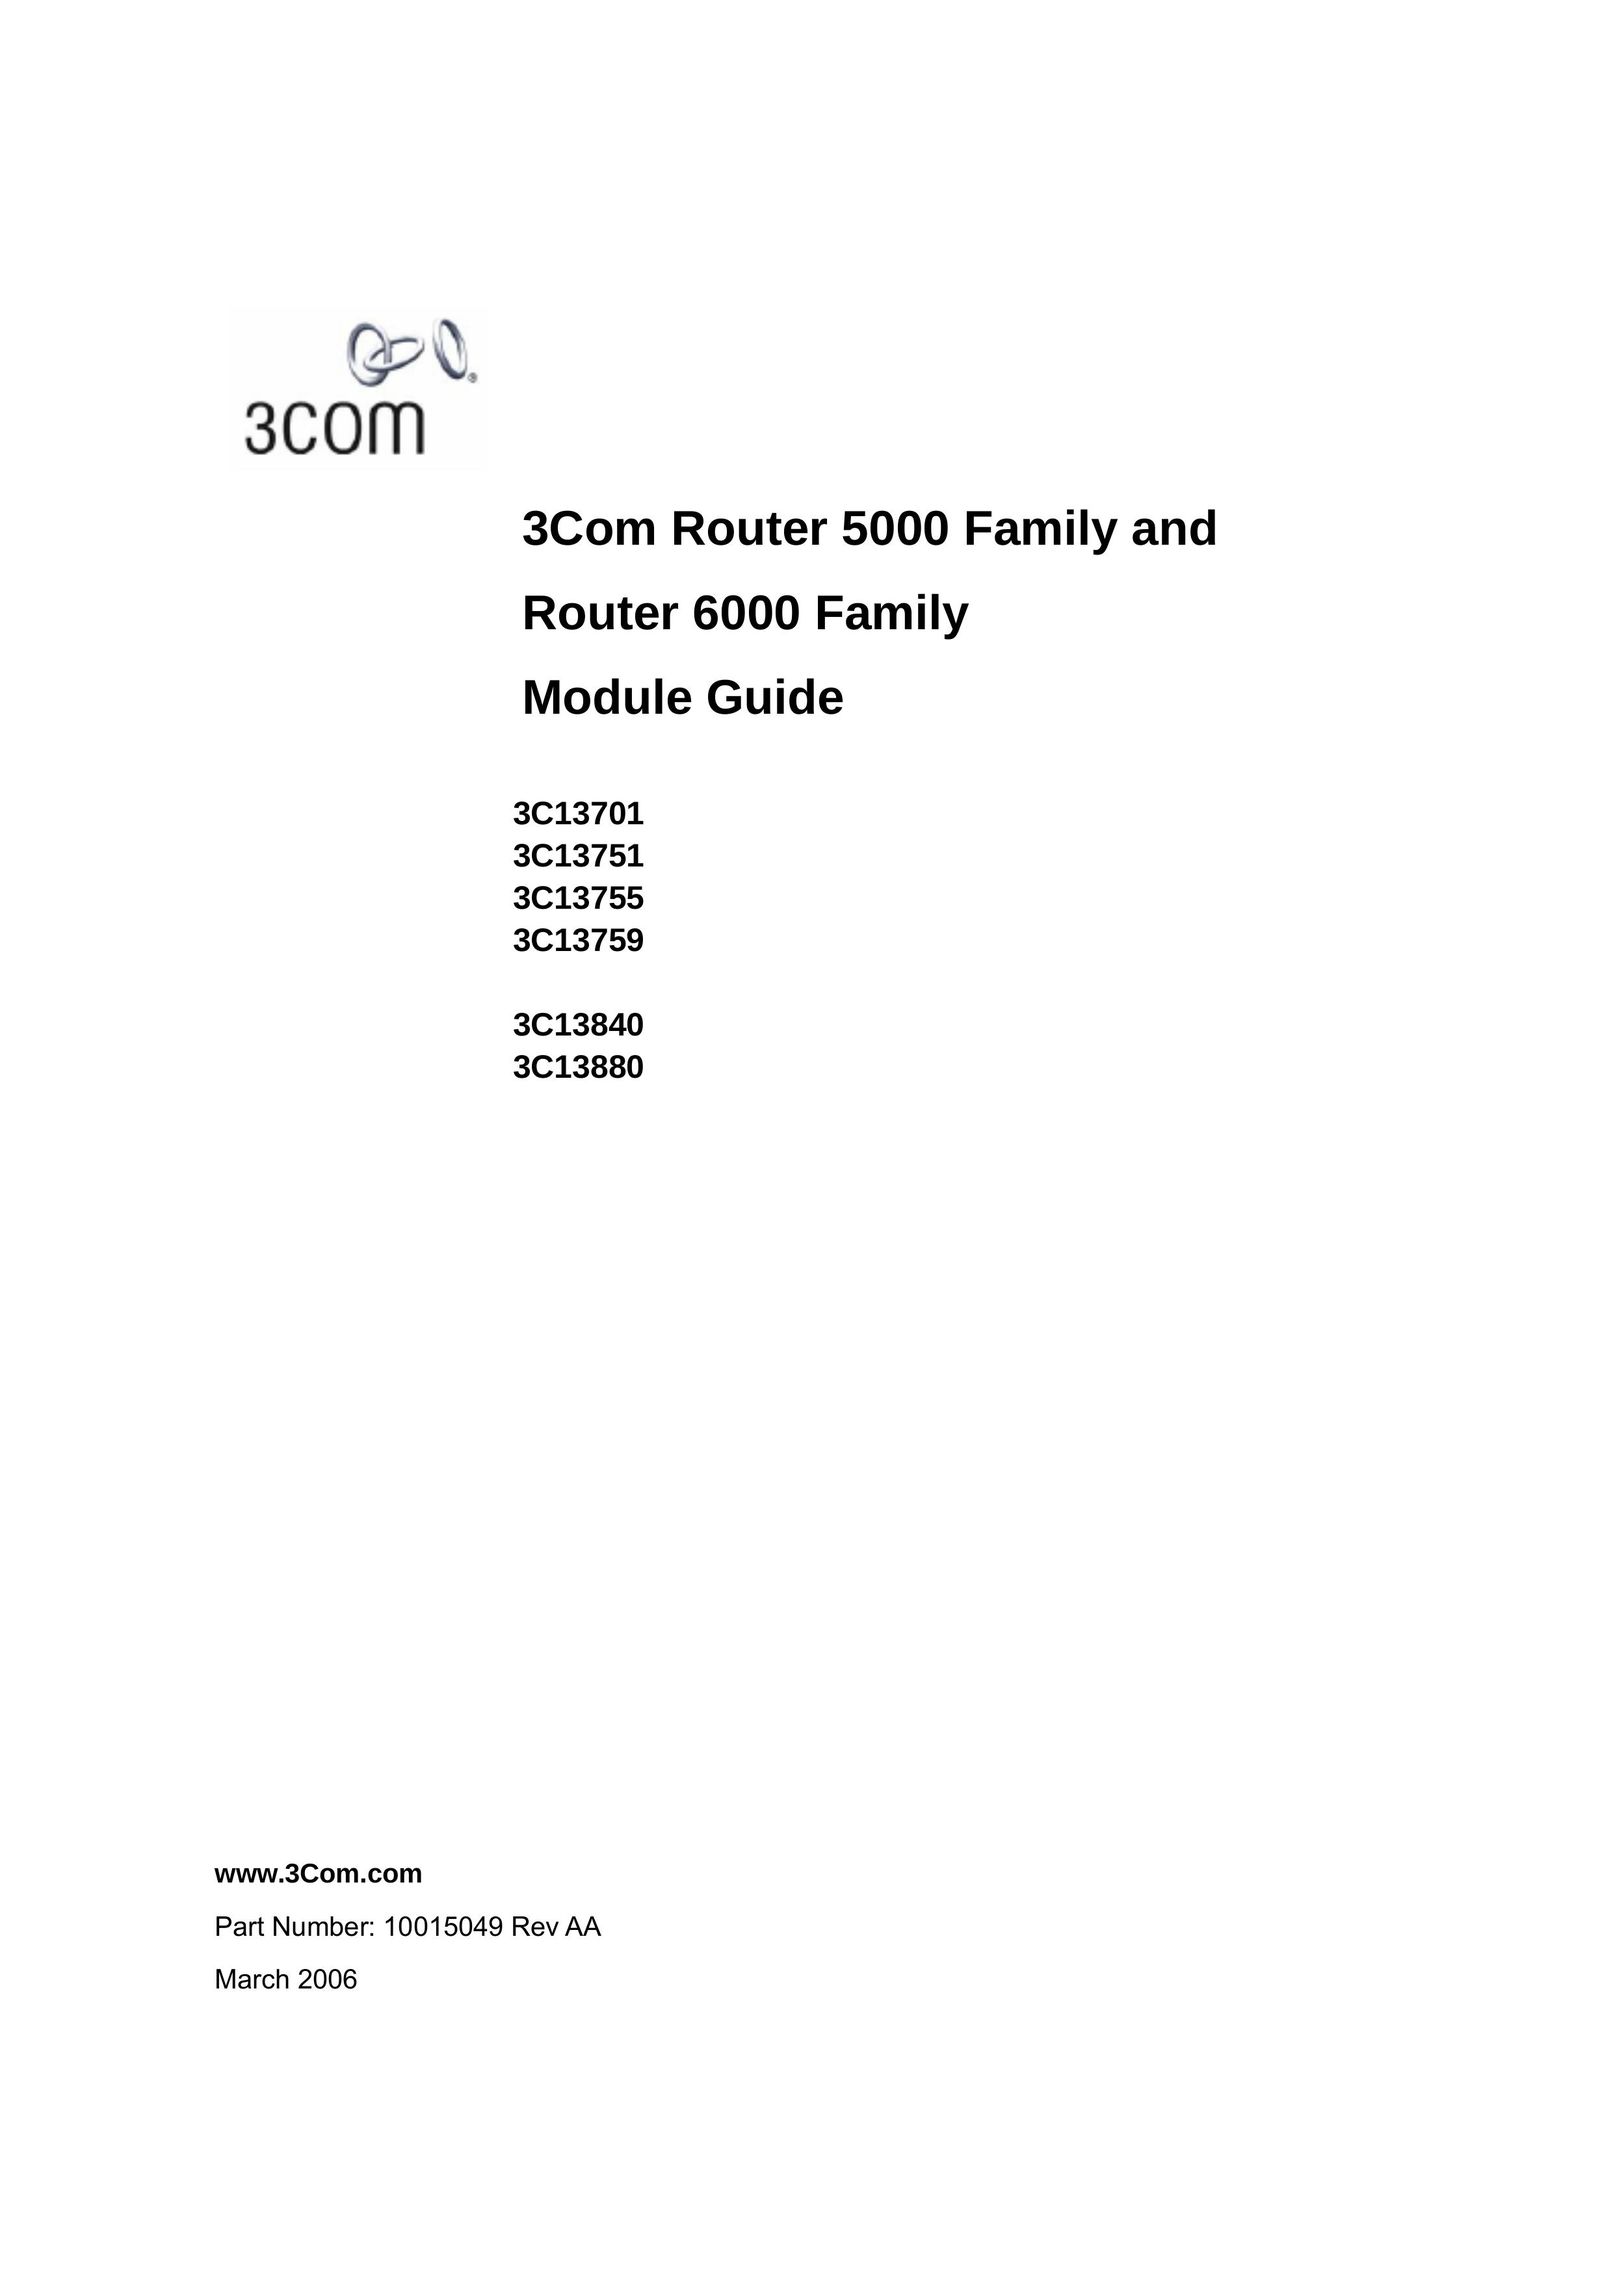 3Com 3C13880 Network Router User Manual